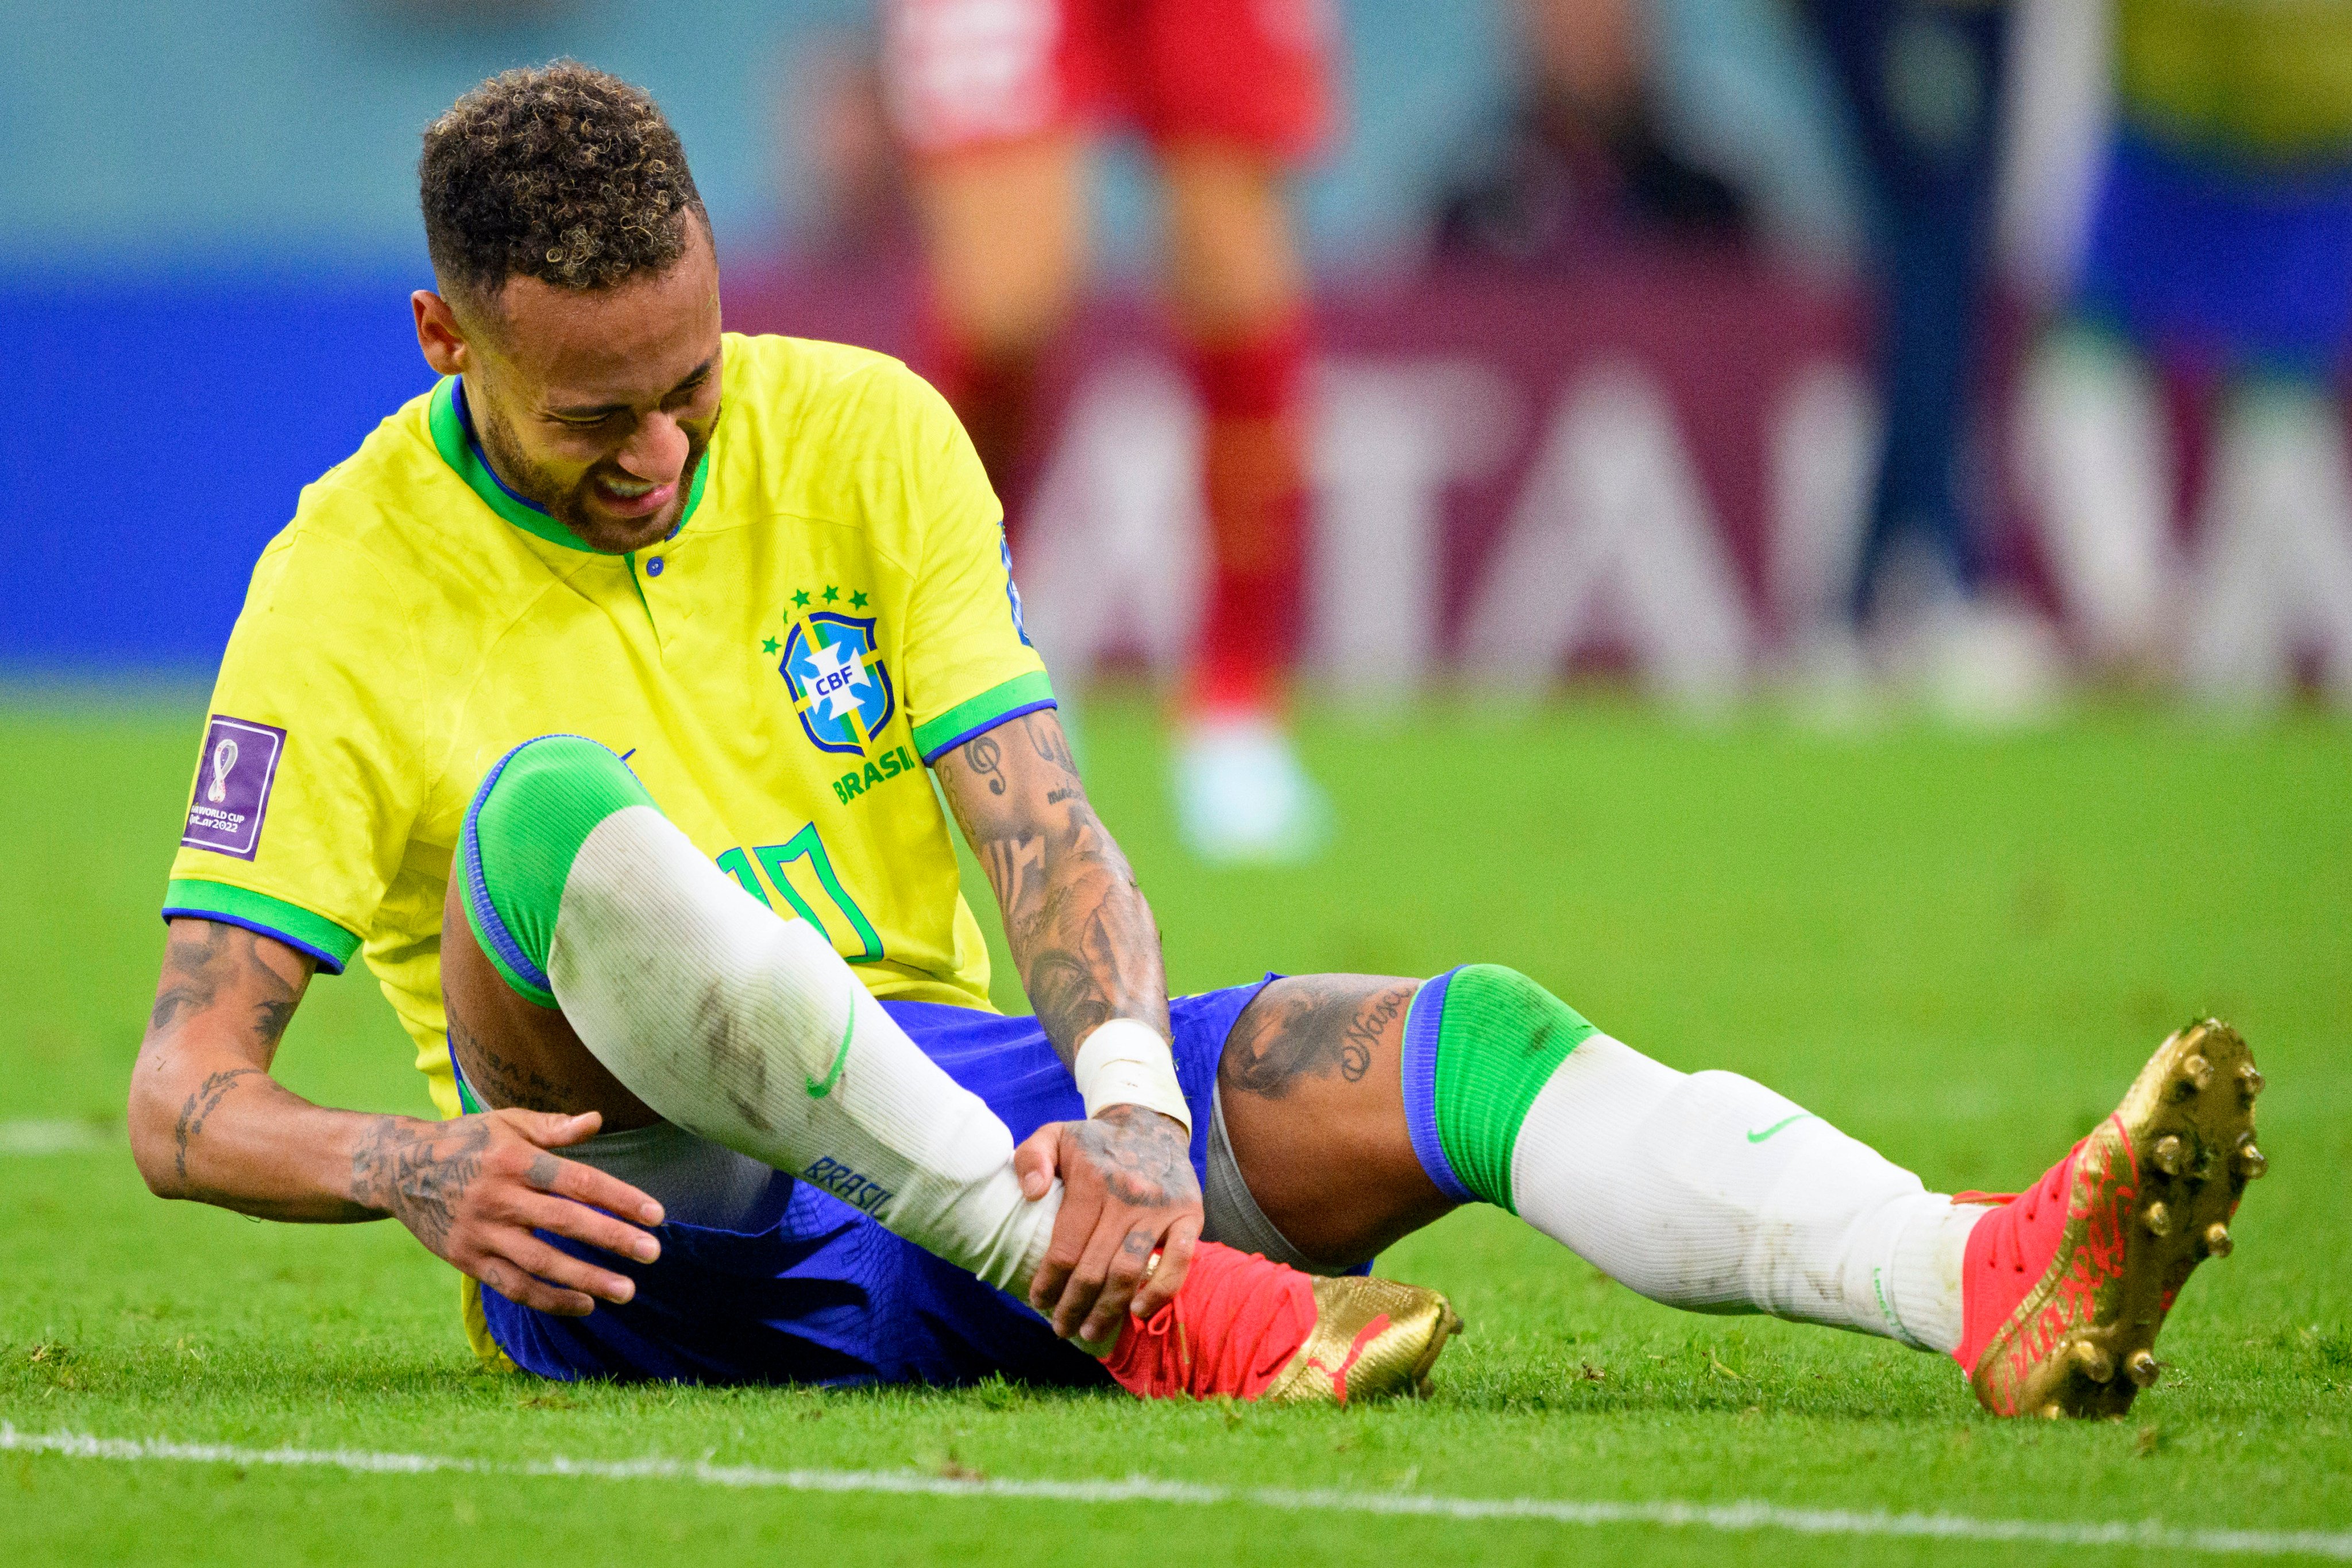 Brazil’s Neymar grabs his ankle after an injury during the World Cup group G match against Serbia at the the Lusail Stadium in Qatar. Photo: AP